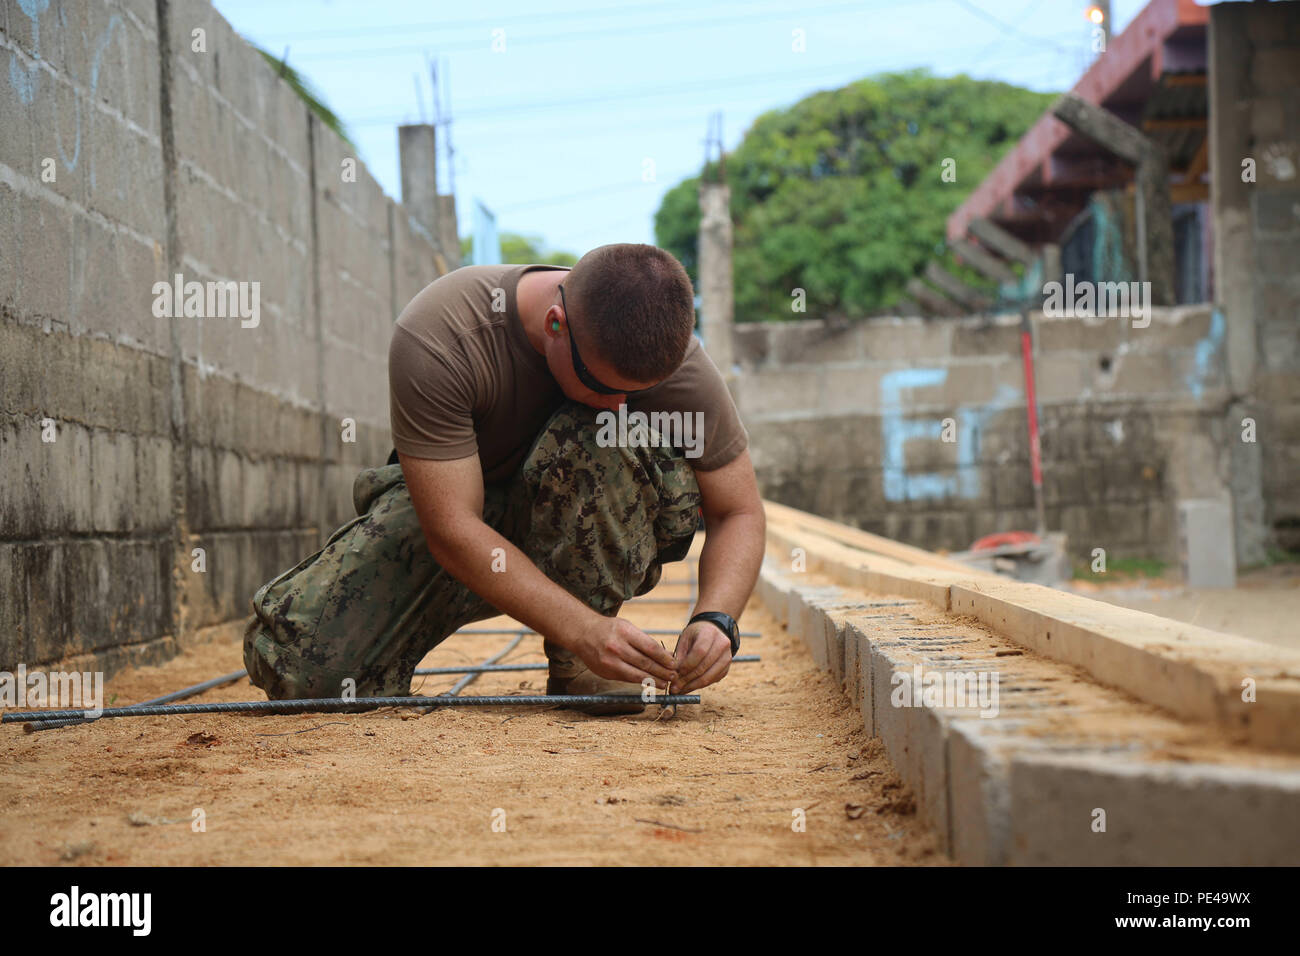 150902-A-ZA034-037 PUERTO CASTILLA, Honduras (Sept. 2, 2015) Steelworker Constructionman Apprentice Josue Batchelortorres, a native of Conroe, Texas, assigned to Construction Battalion Maintenance Unit 202 Jacksonville, Fla., secures rebar before laying cement at an engineering site established at the Centro Basico 14 de Agosto Lugar Puerto Castilla School during Continuing Promise 2015. Continuing Promise is a U.S. Southern Command-sponsored and U.S. Naval Forces Southern Command/U.S. 4th Fleet-conducted deployment to conduct civil-military operations including humanitarian-civil assistance,  Stock Photo